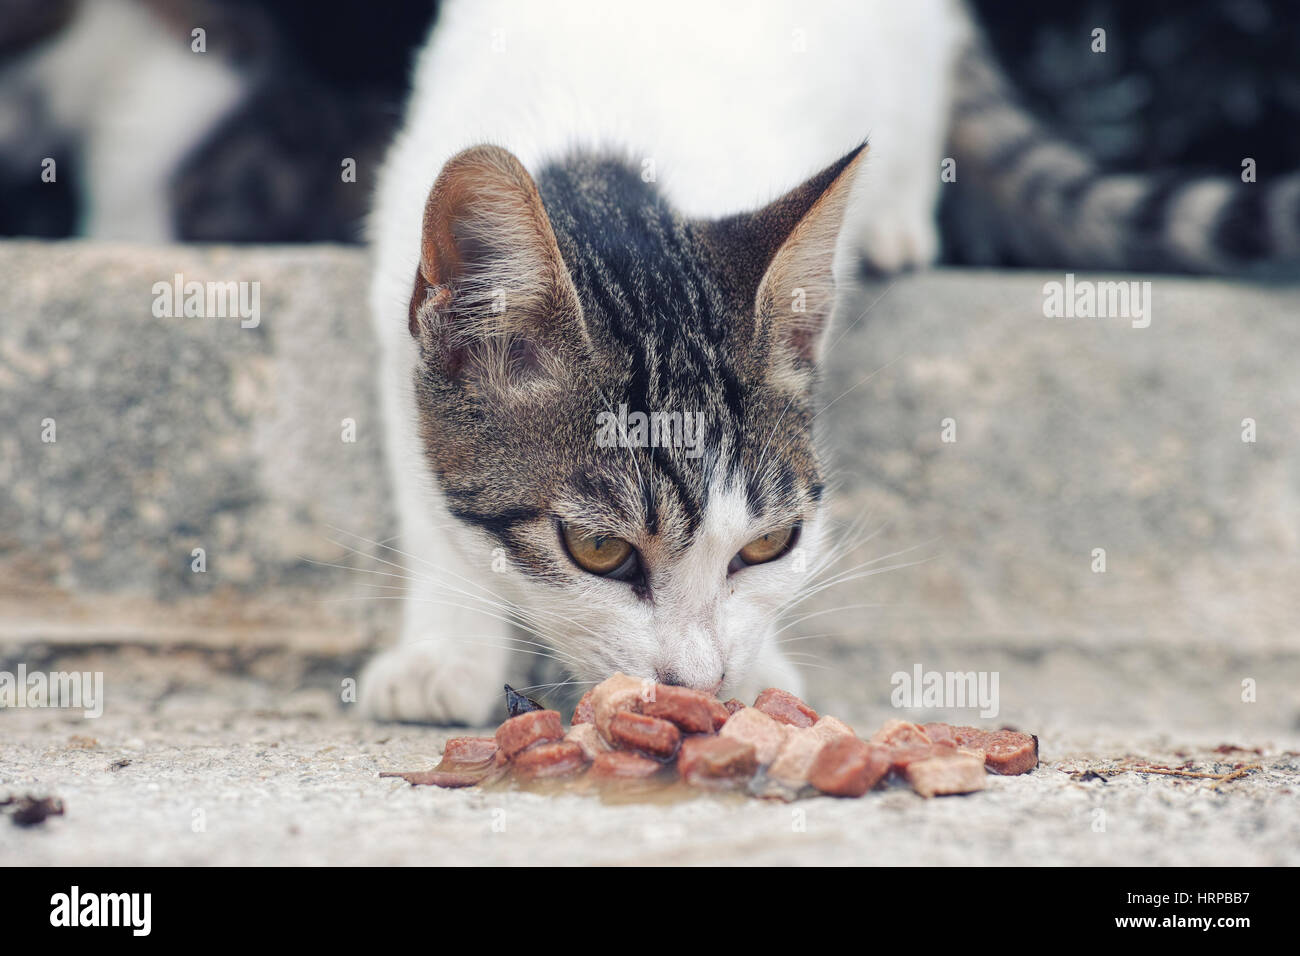 Stray cat eating cat food. Close up. Stock Photo